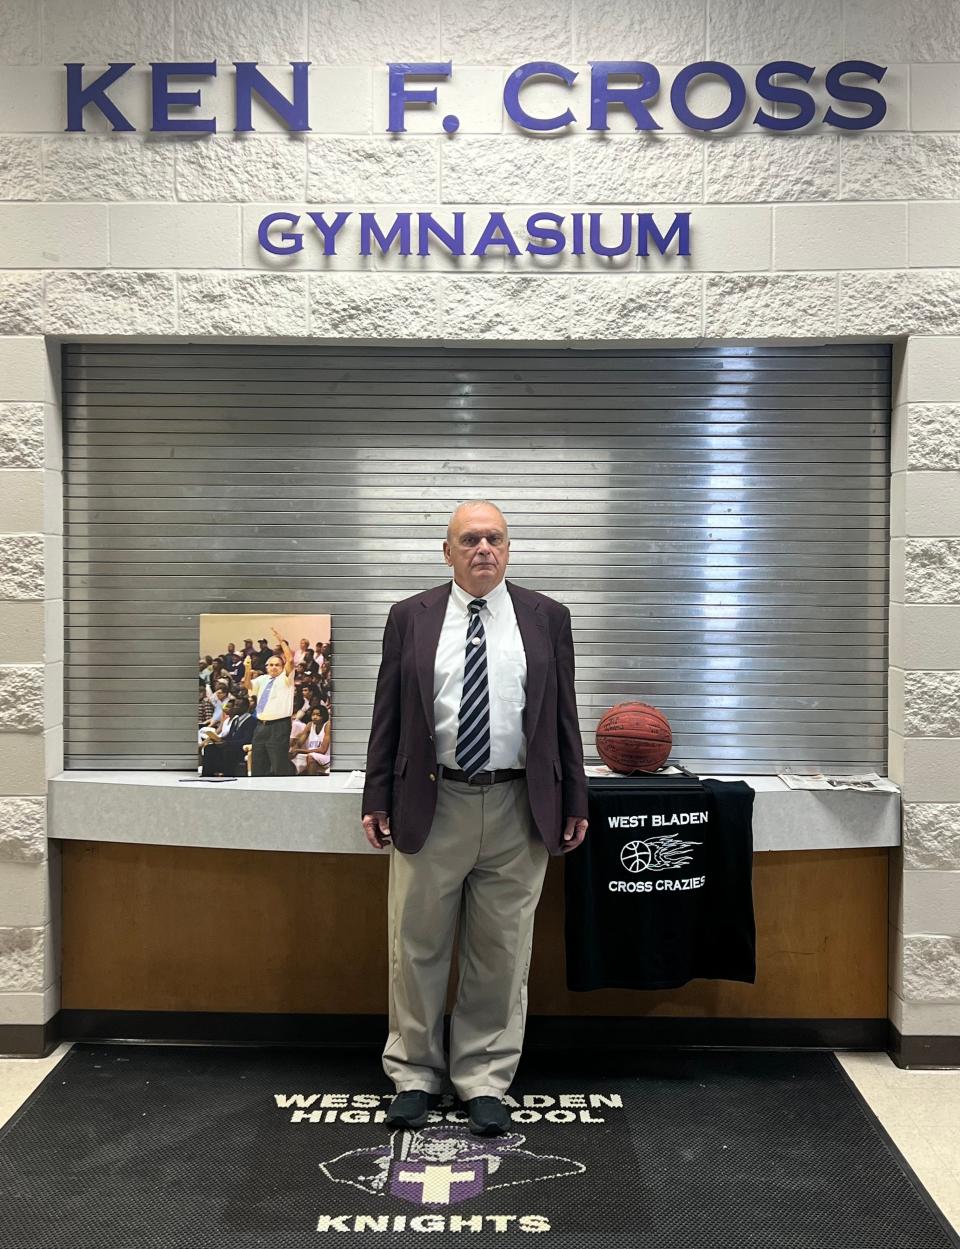 Former West Bladen basketball coach Ken Cross had the Knights' gym named in his honor. Cross and more than 70 people gathered at the school on Sunday to celebrate Cross' career.